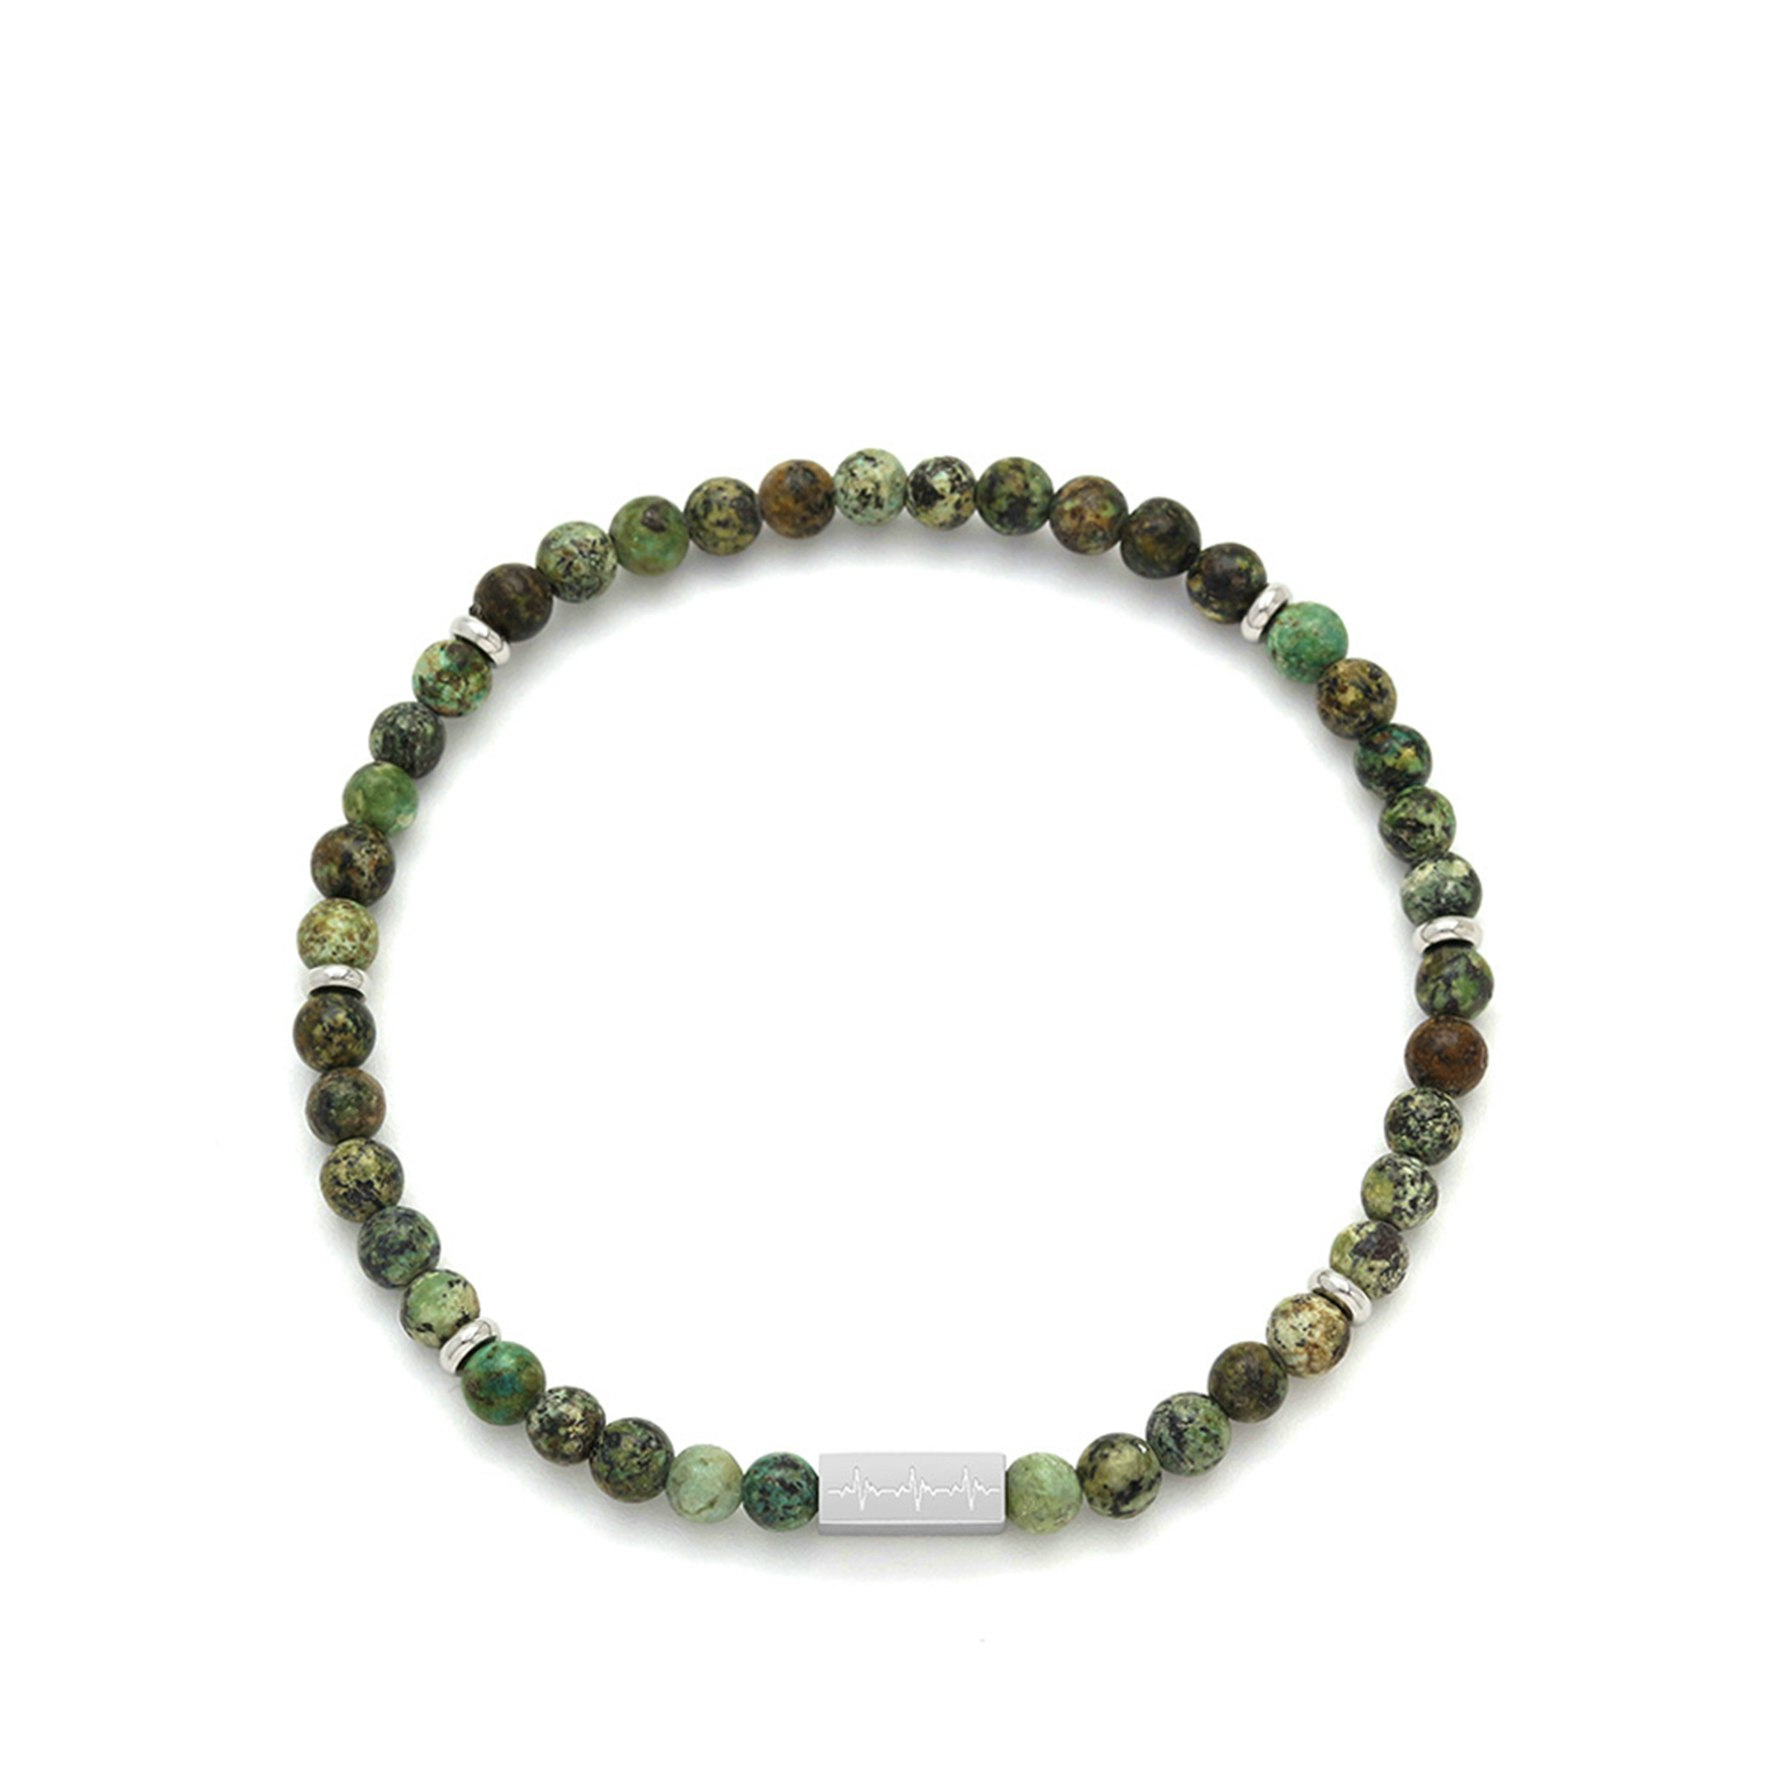 Evolution African Turquoise Bracelet from SAMIE in Stainless steel